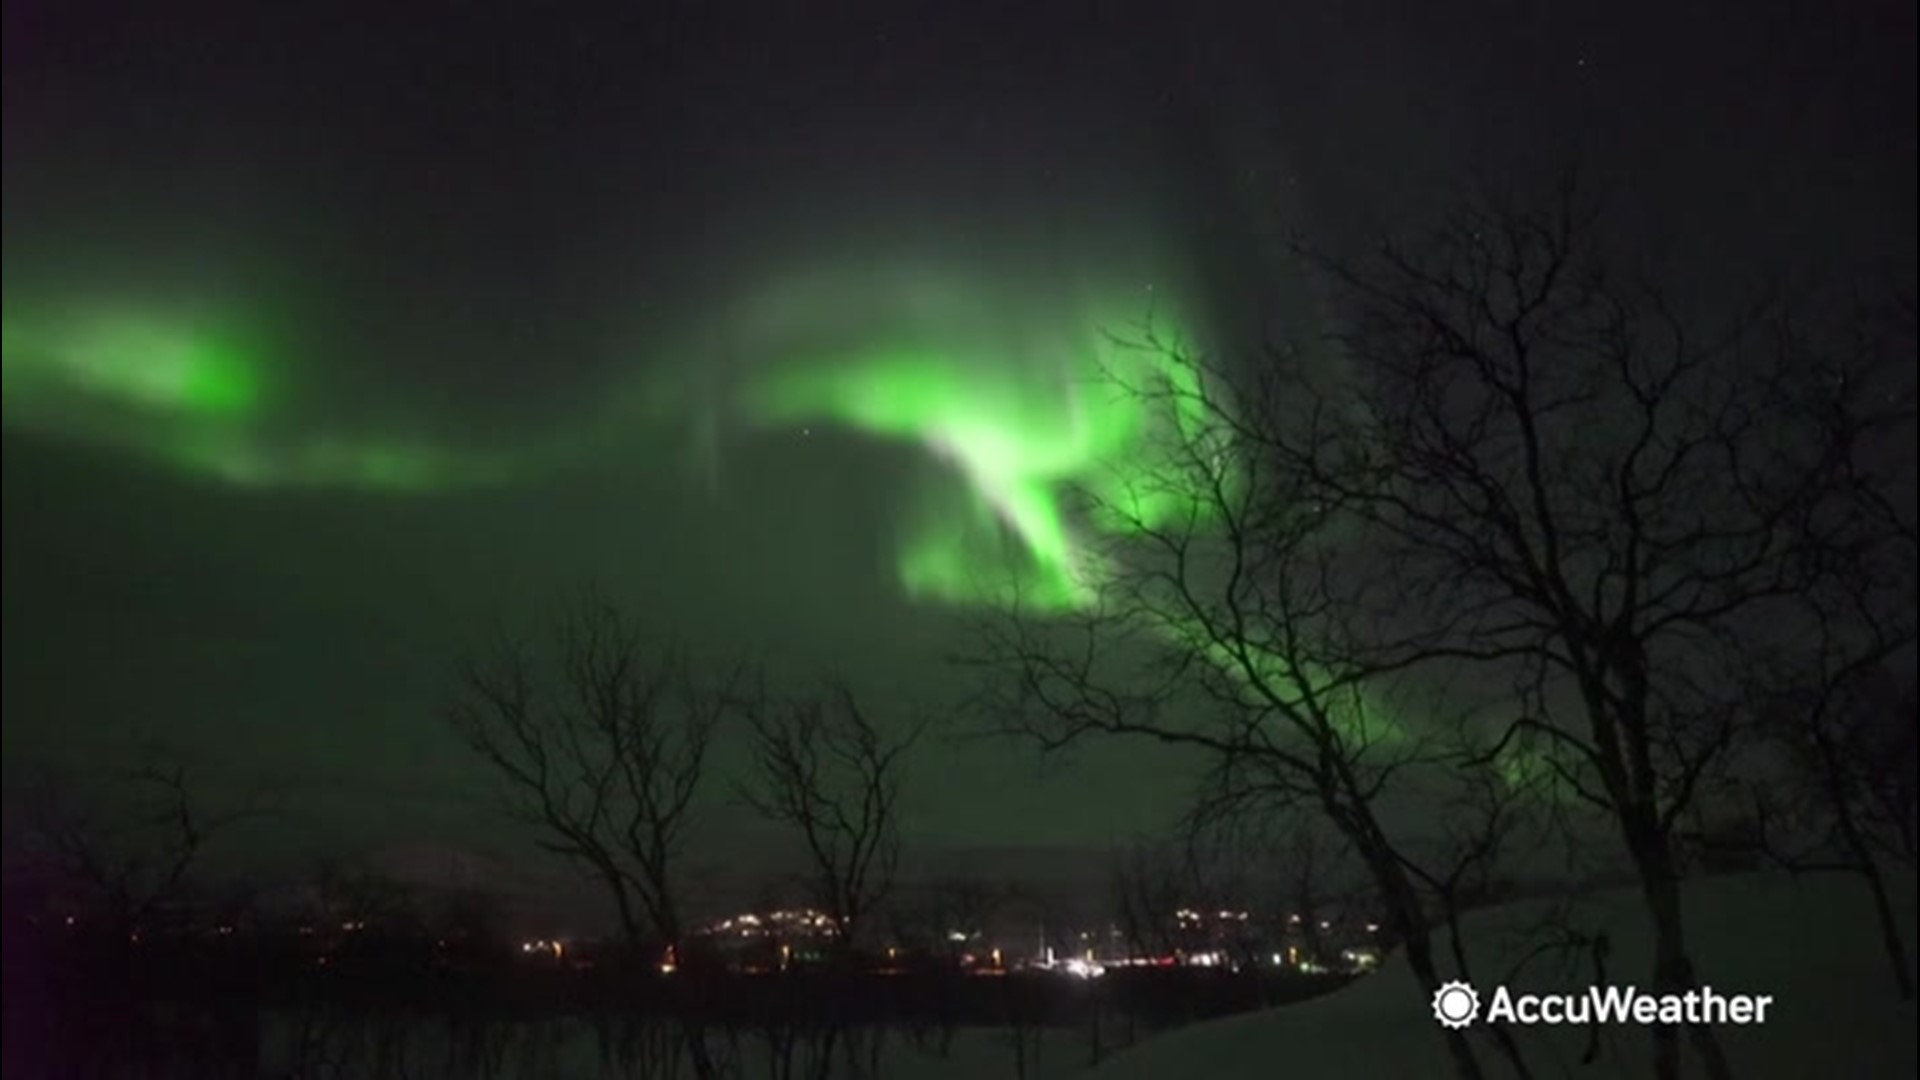 Polar lights are in full swing this winter. Areas like Finland are experiencing vivid colors in their skies. Auroras like these are primarily caused by solar wind.